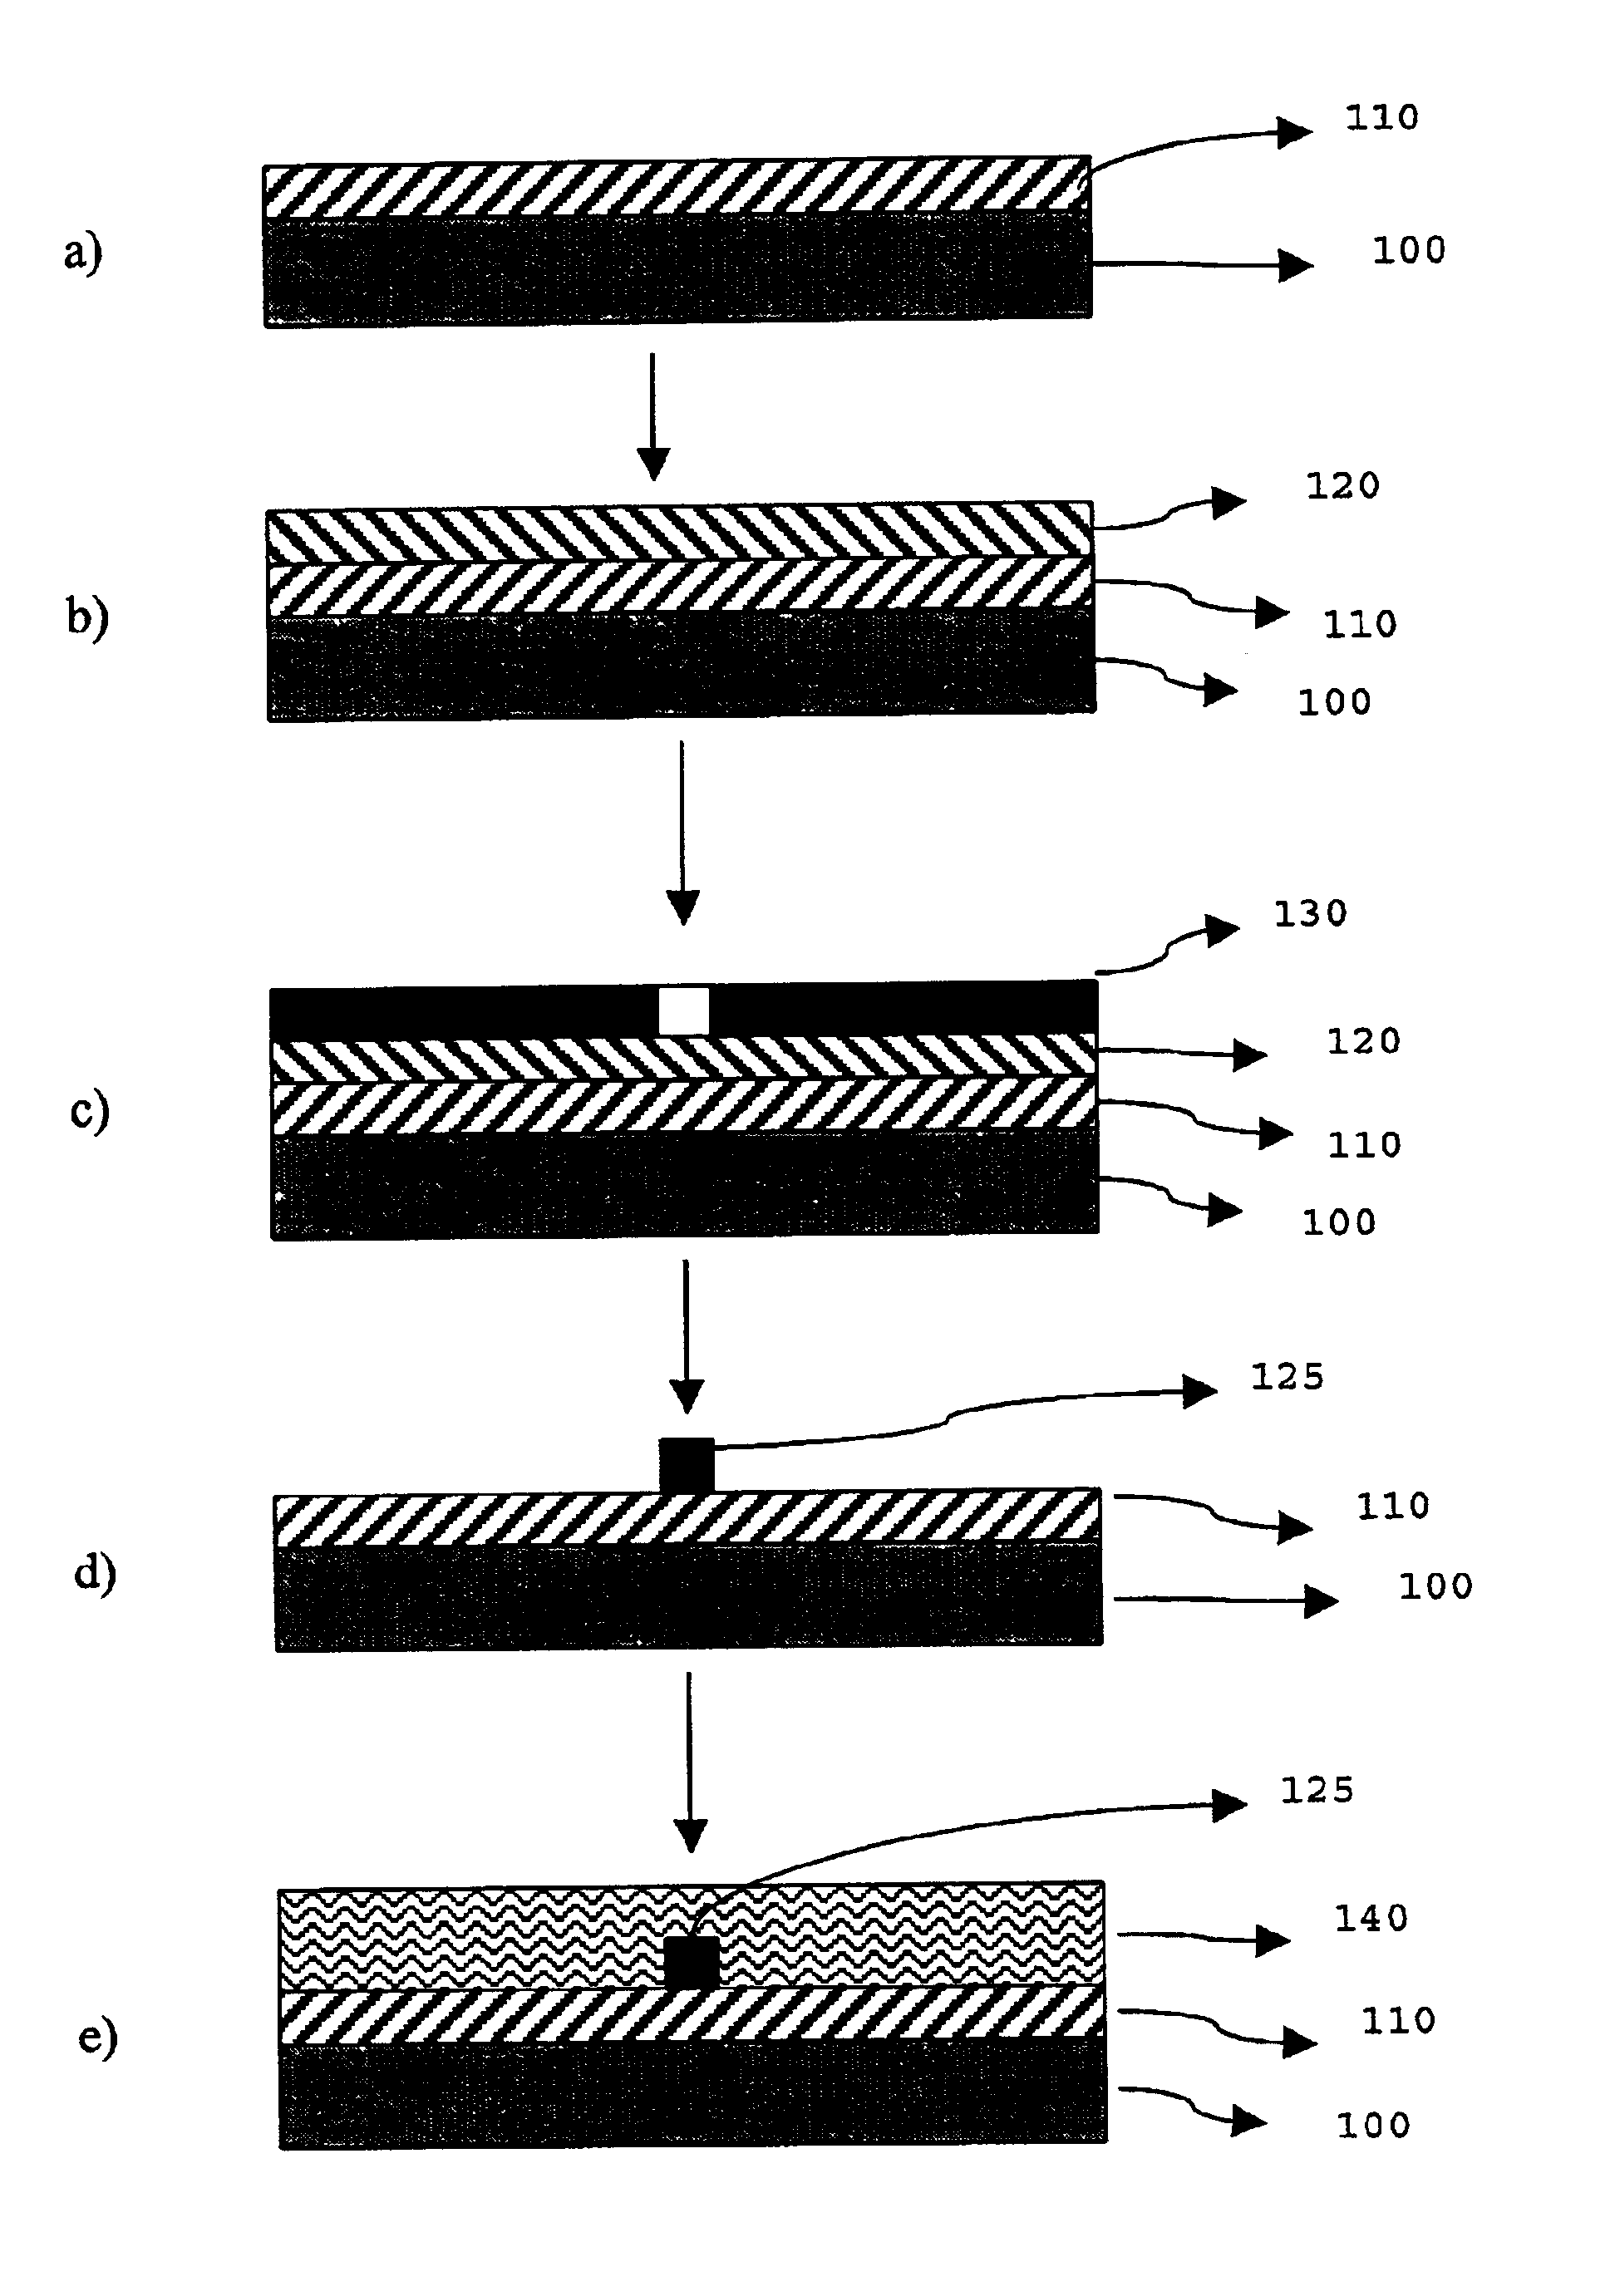 Fluorinated photopolymer composition and waveguide device